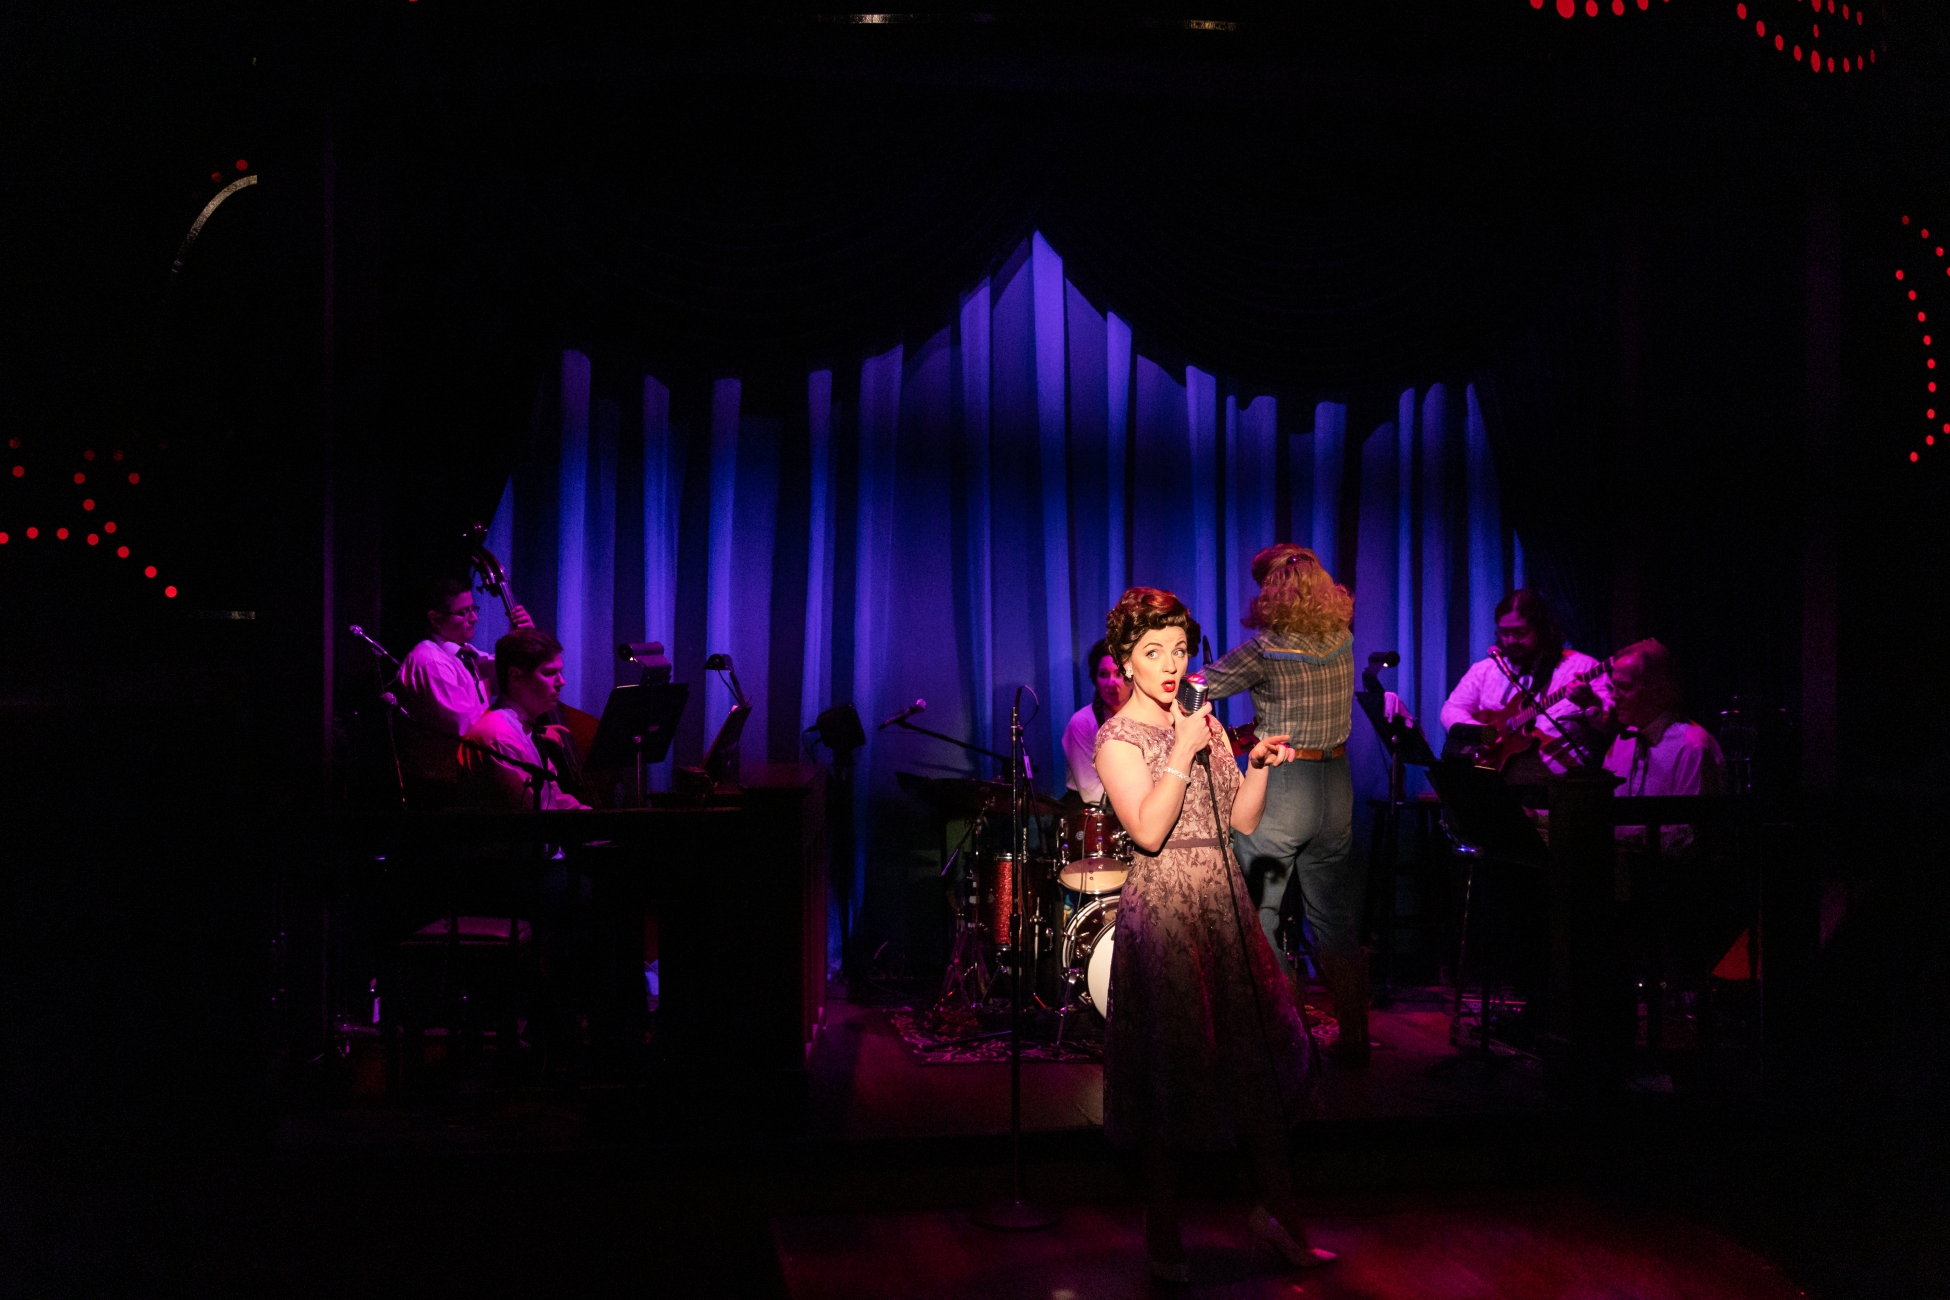 Cassie Chilton as Patsy Cline and Katie McFadzen as Louise in front of a band made up of Kevin White on piano, Ken Skaggs on the pedal steel guitar, Andrew Gonzalez on guitar, Nathaniel De La Cruz on bass, and Michelle Chin on drums.